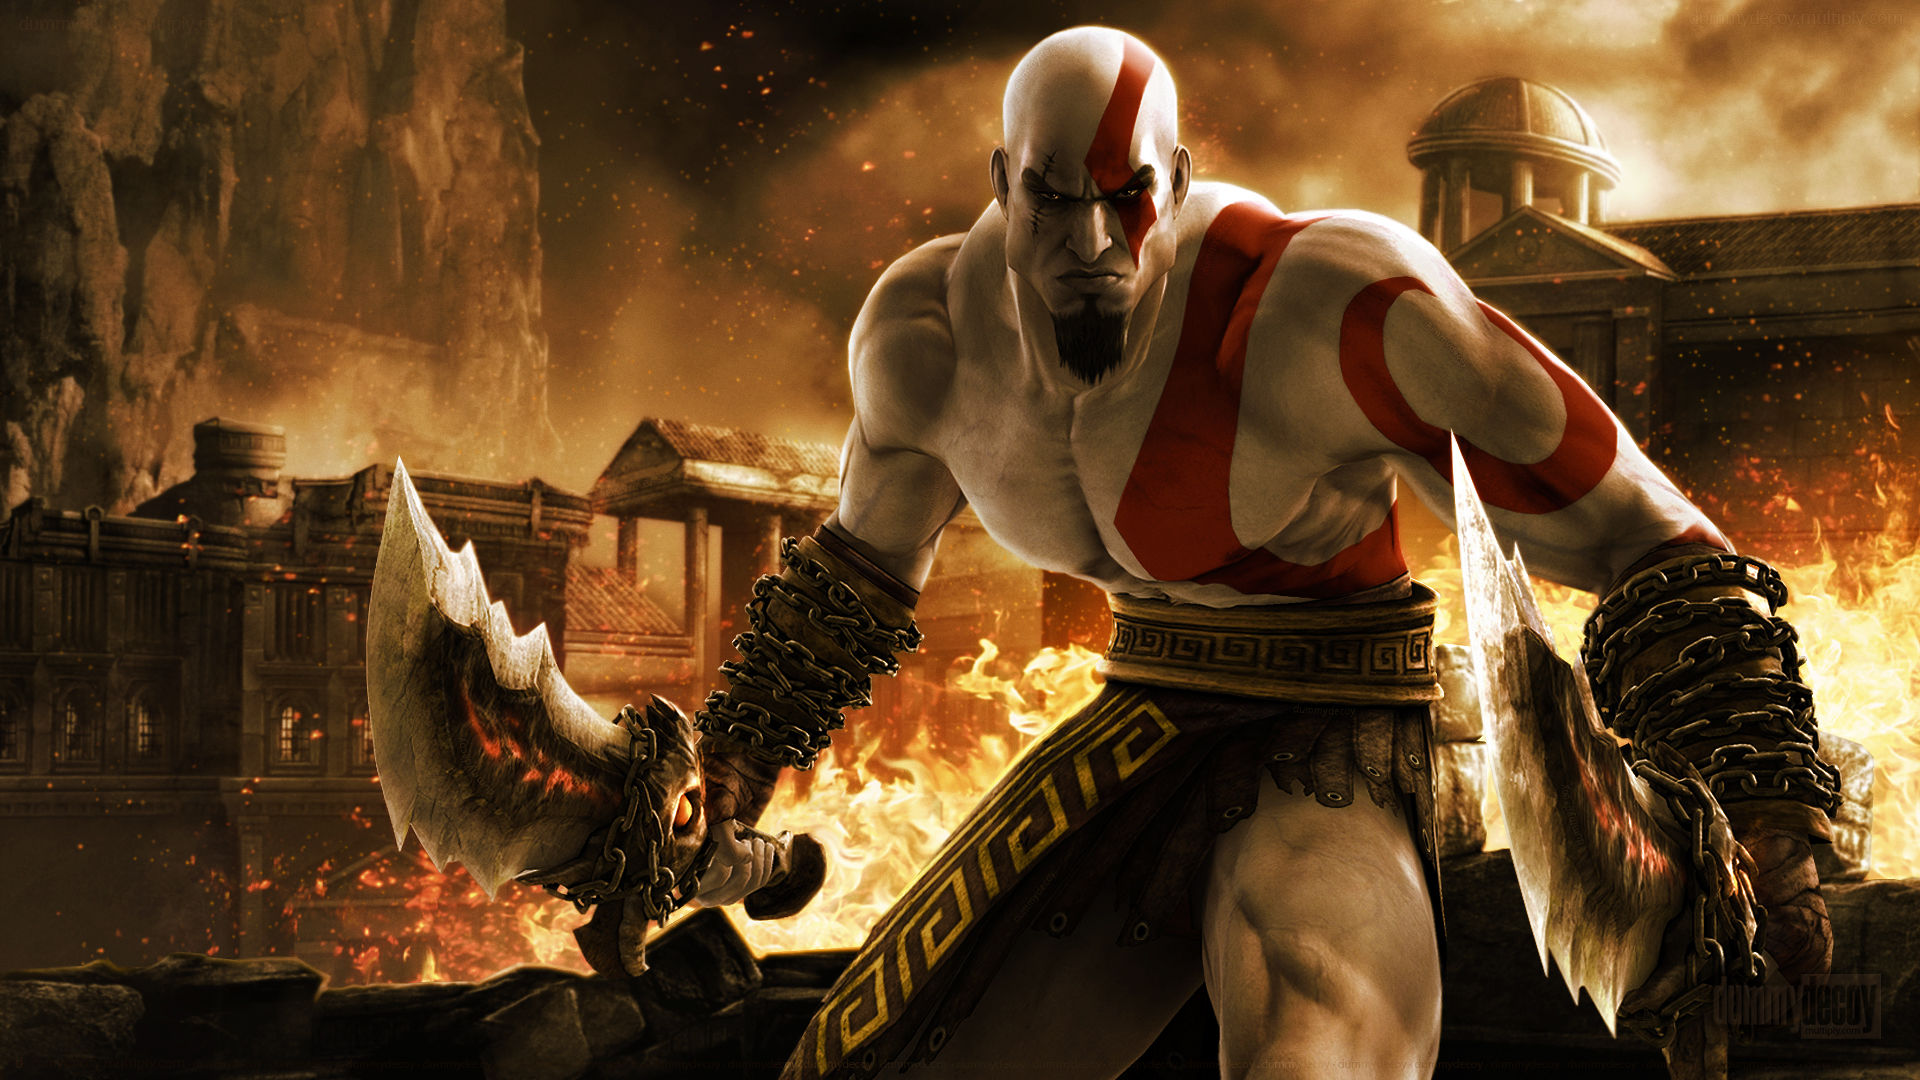 God Of War Backgrounds, Compatible - PC, Mobile, Gadgets| 1920x1080 px